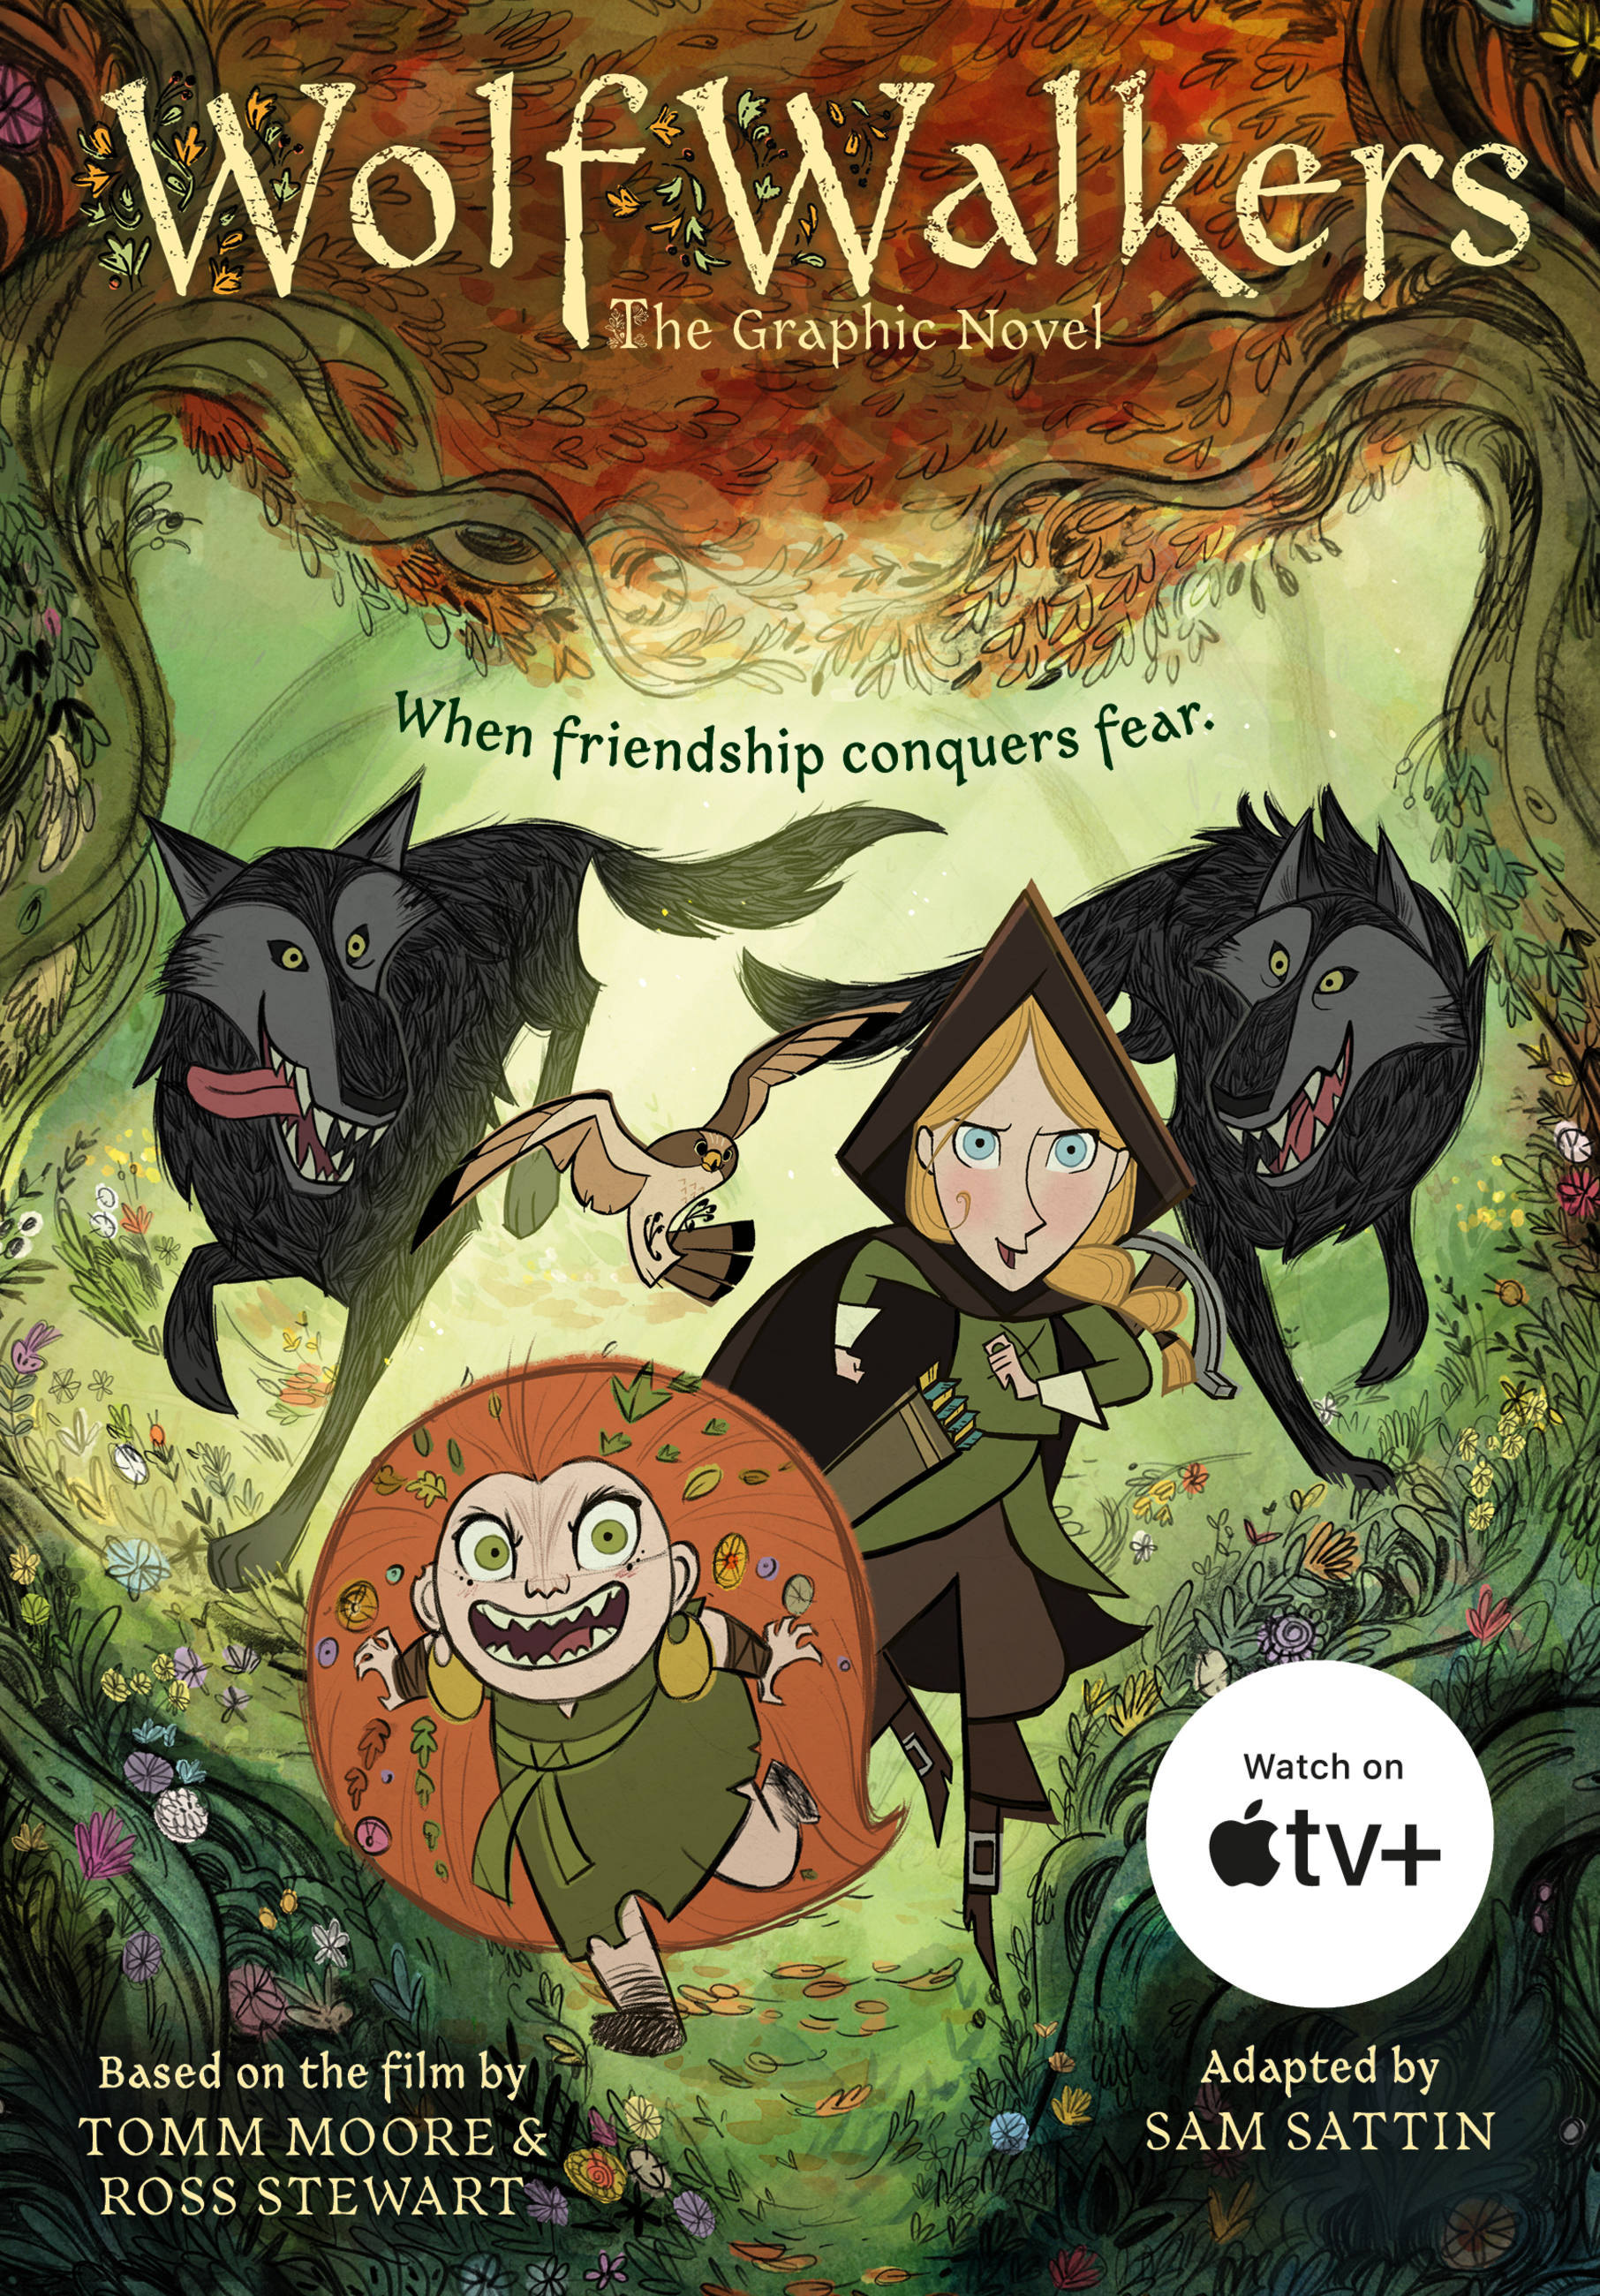 WolfWalkers: The Graphic Novel by Tomm Moore & Ross Stewart | Little, Brown  Books for Young Readers